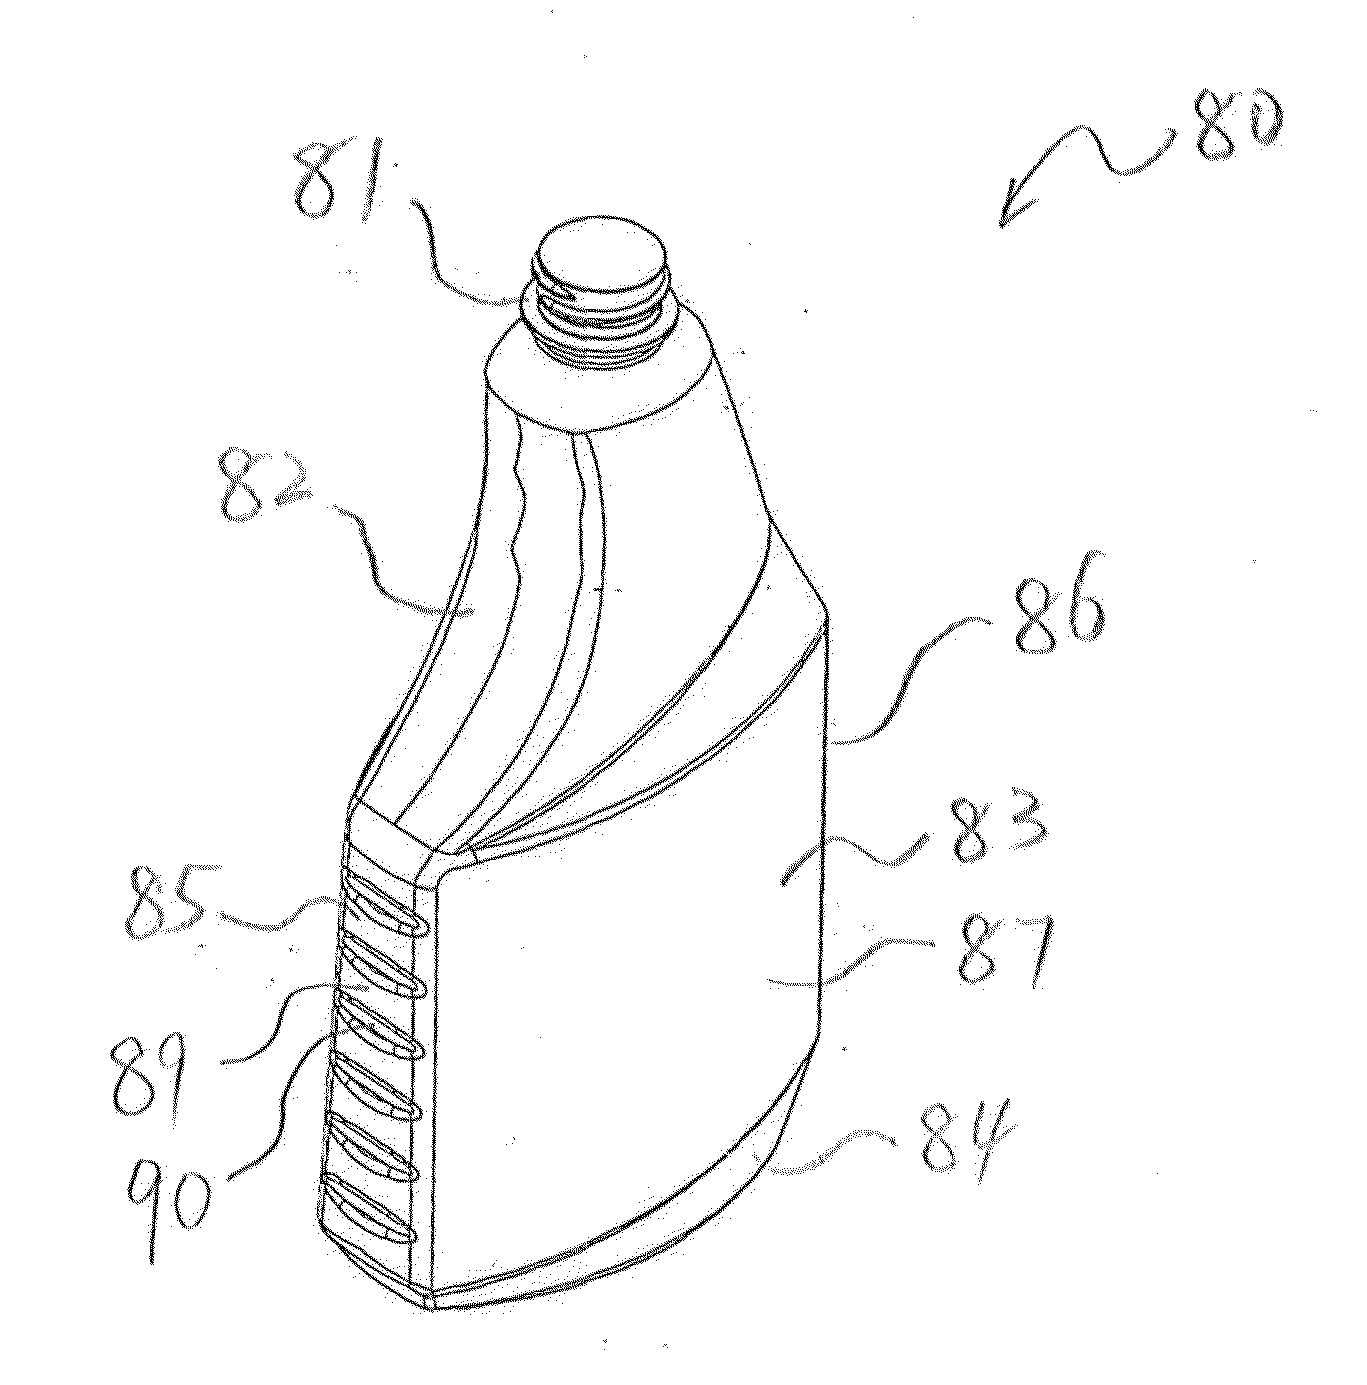 Bottle with Top Loading Resistance with Front and Back Ribs